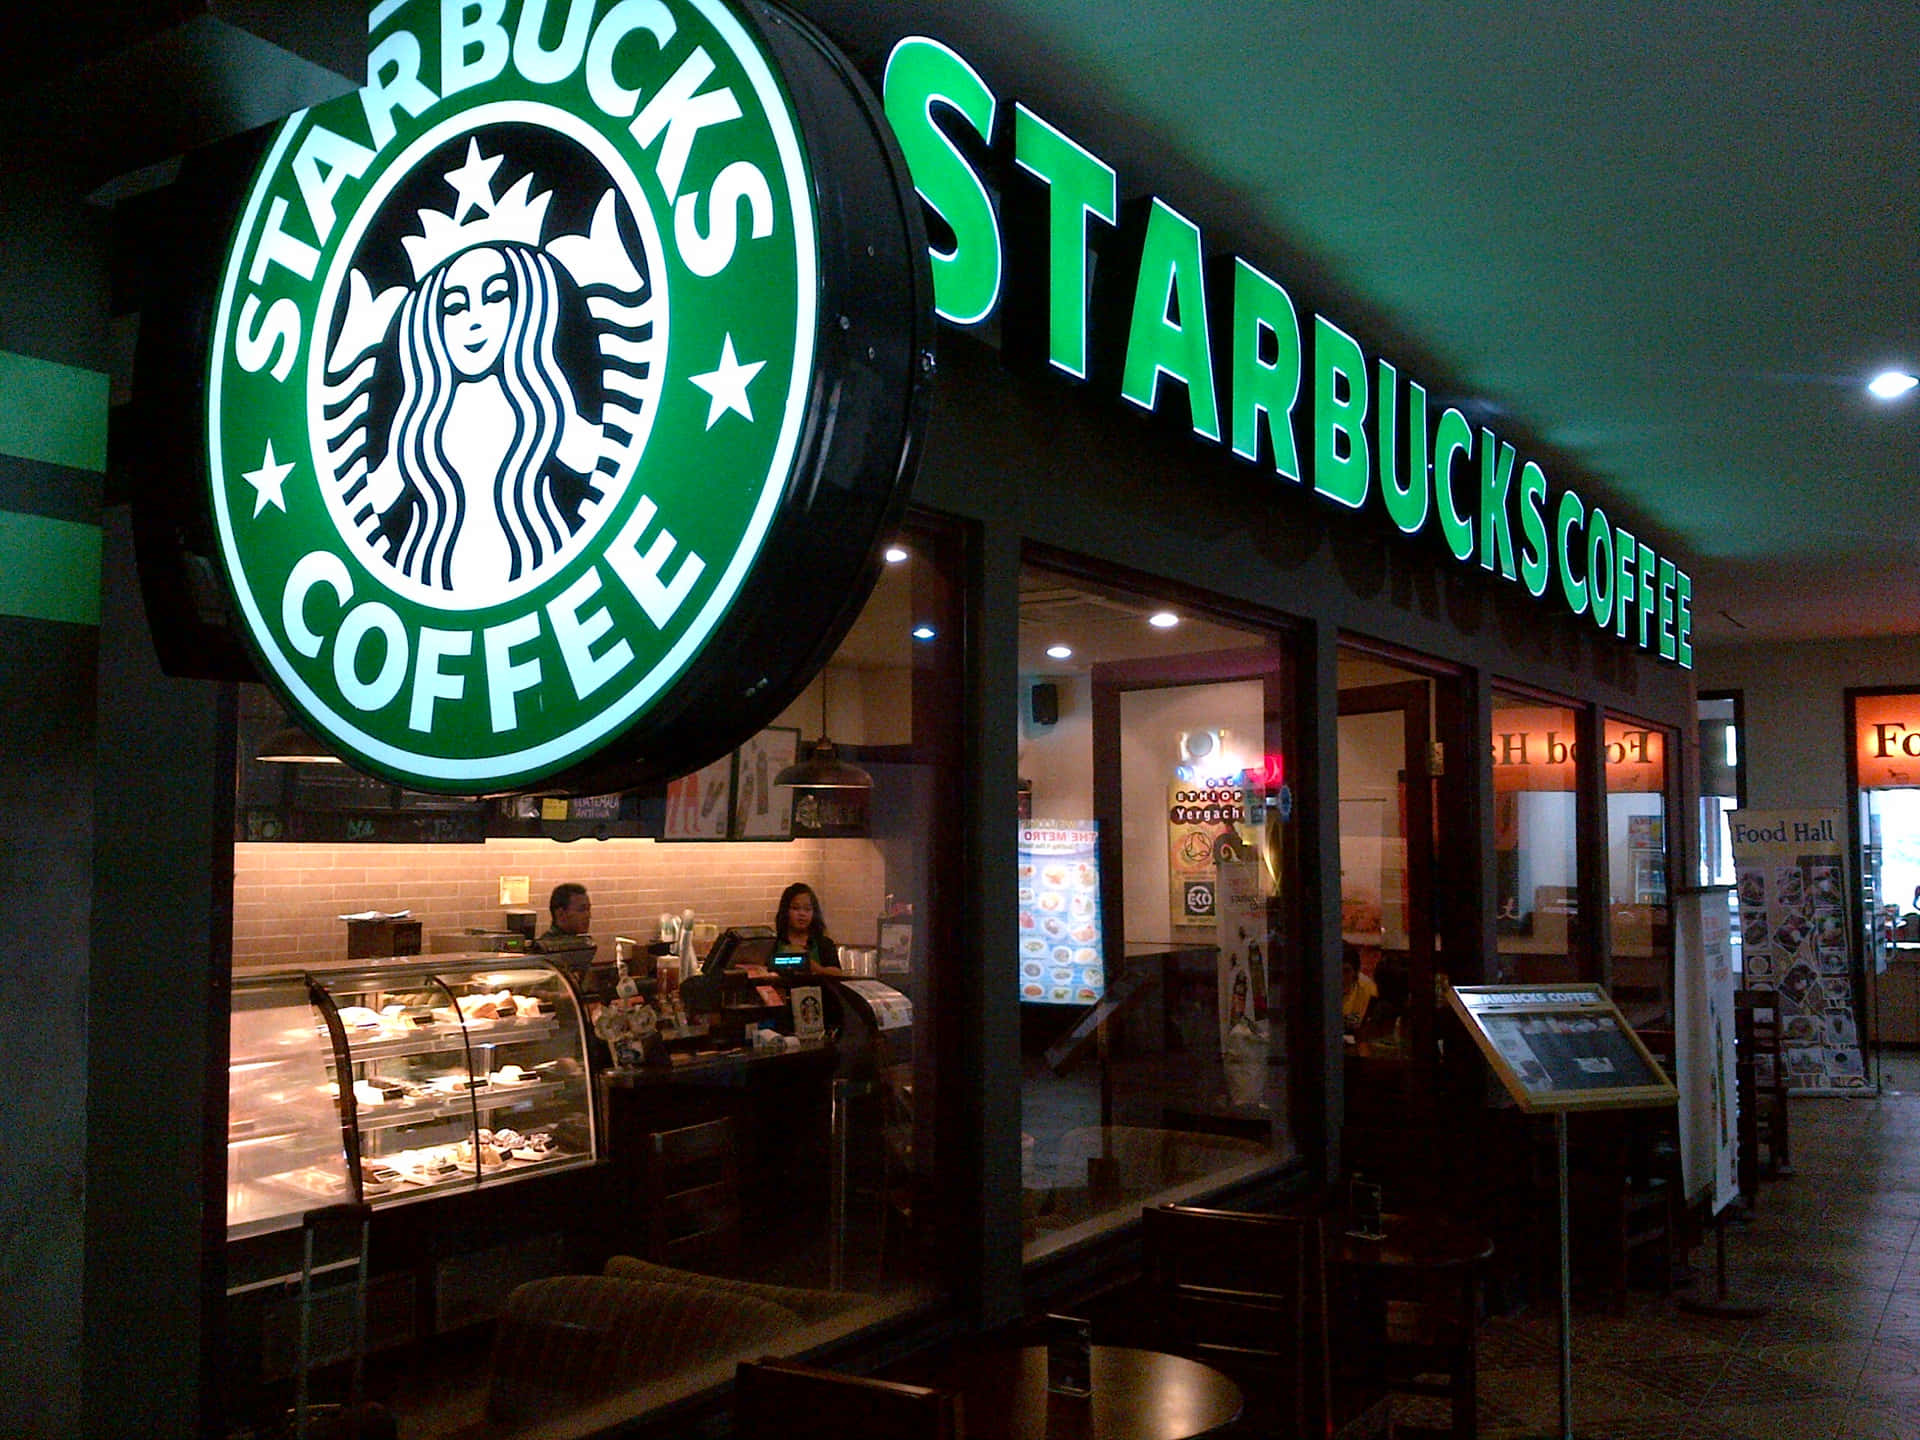 Get your daily Starbucks and enjoy your coffee break